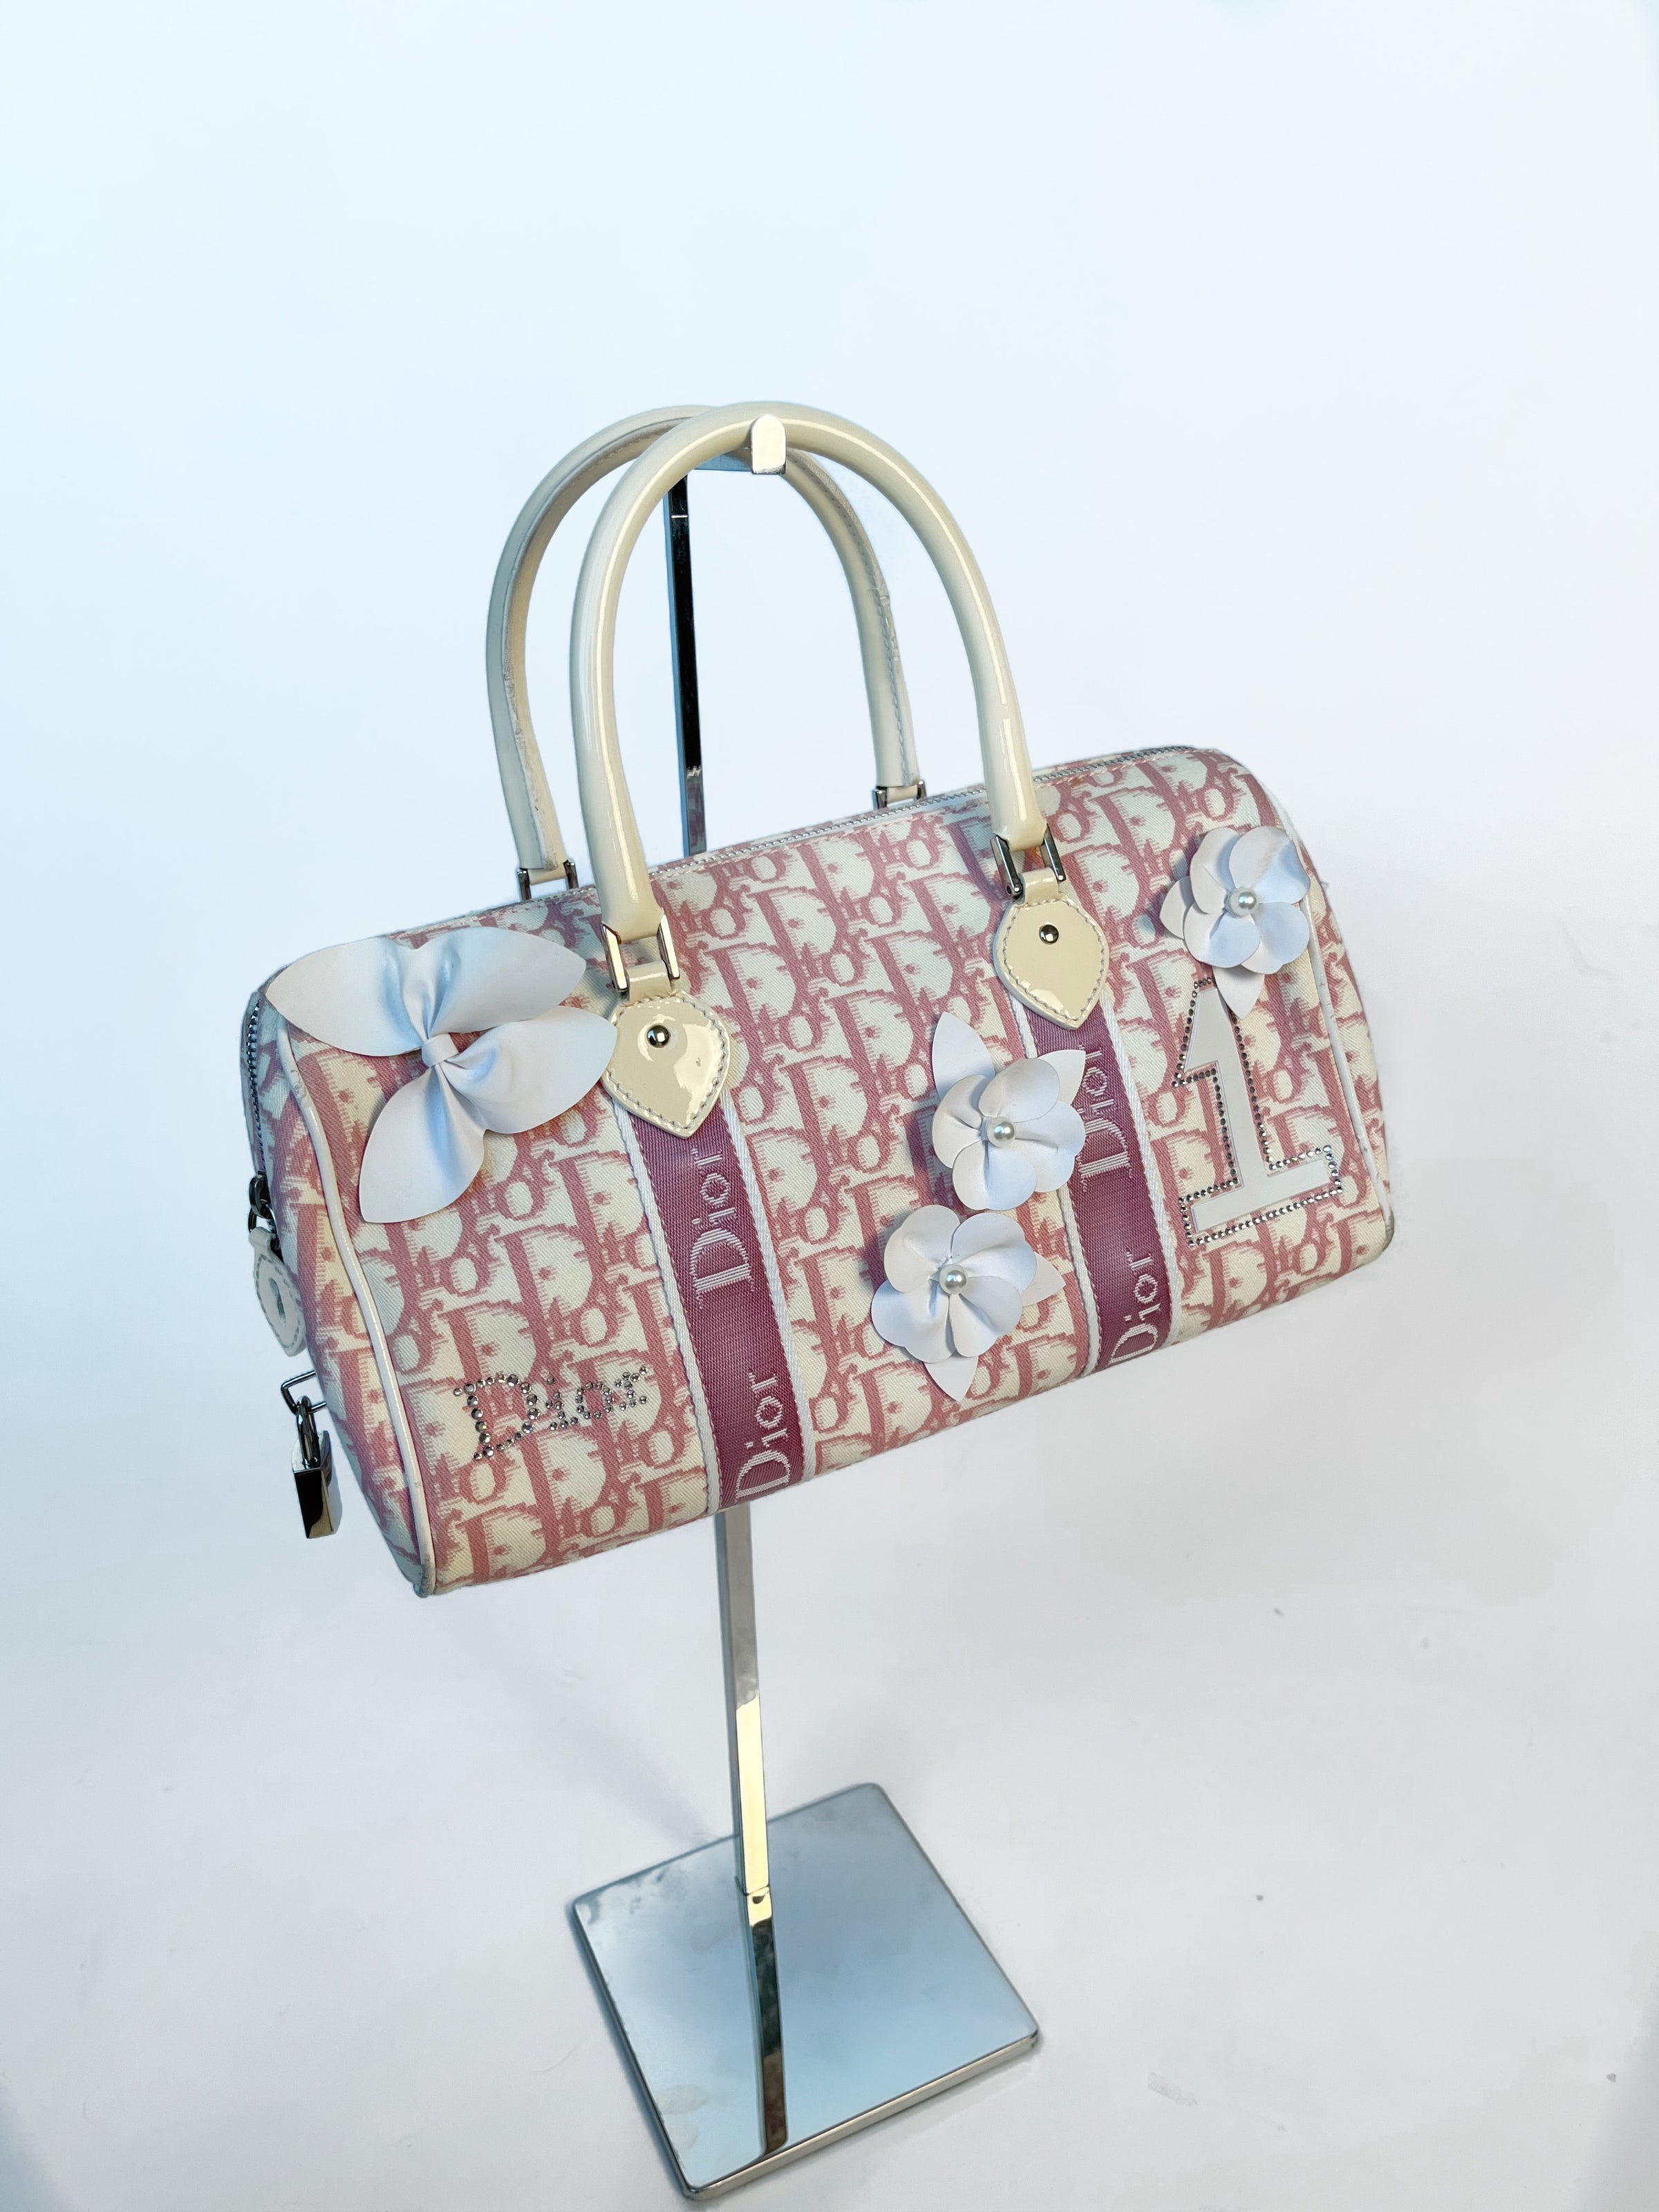 Vintage & Vogue UK - A classic Louis Vuitton Pochette Cite shoulder bag  today, in the famous monogram print. It comes with the original box, dust  bag and is in pristine condition!